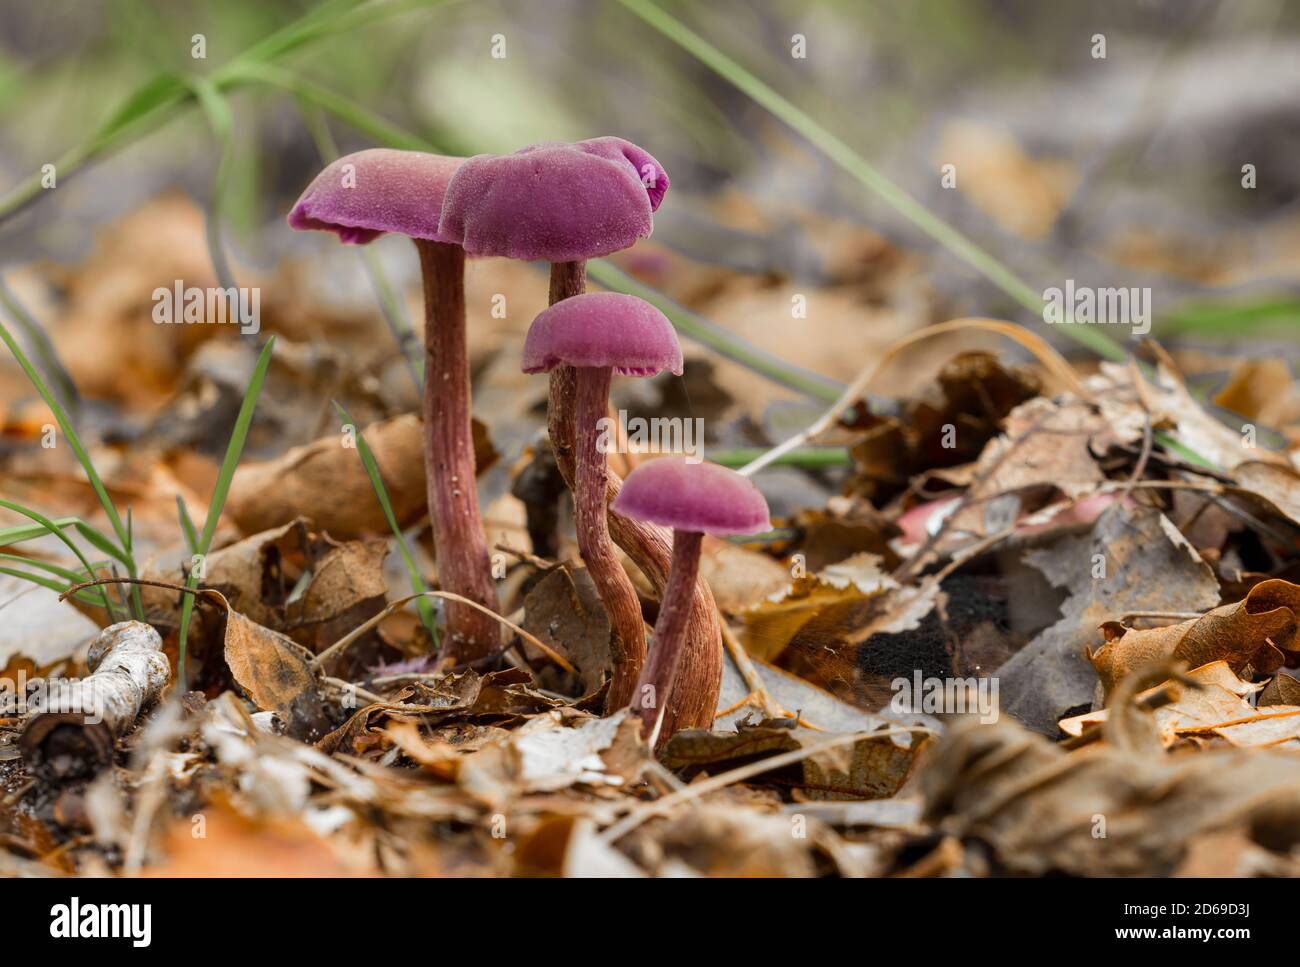 purple mushroom in soft focus with shallow depth. Laccaria amethystina or the amethyst deceiver between the moss and ferns on the forest floor. Stock Photo